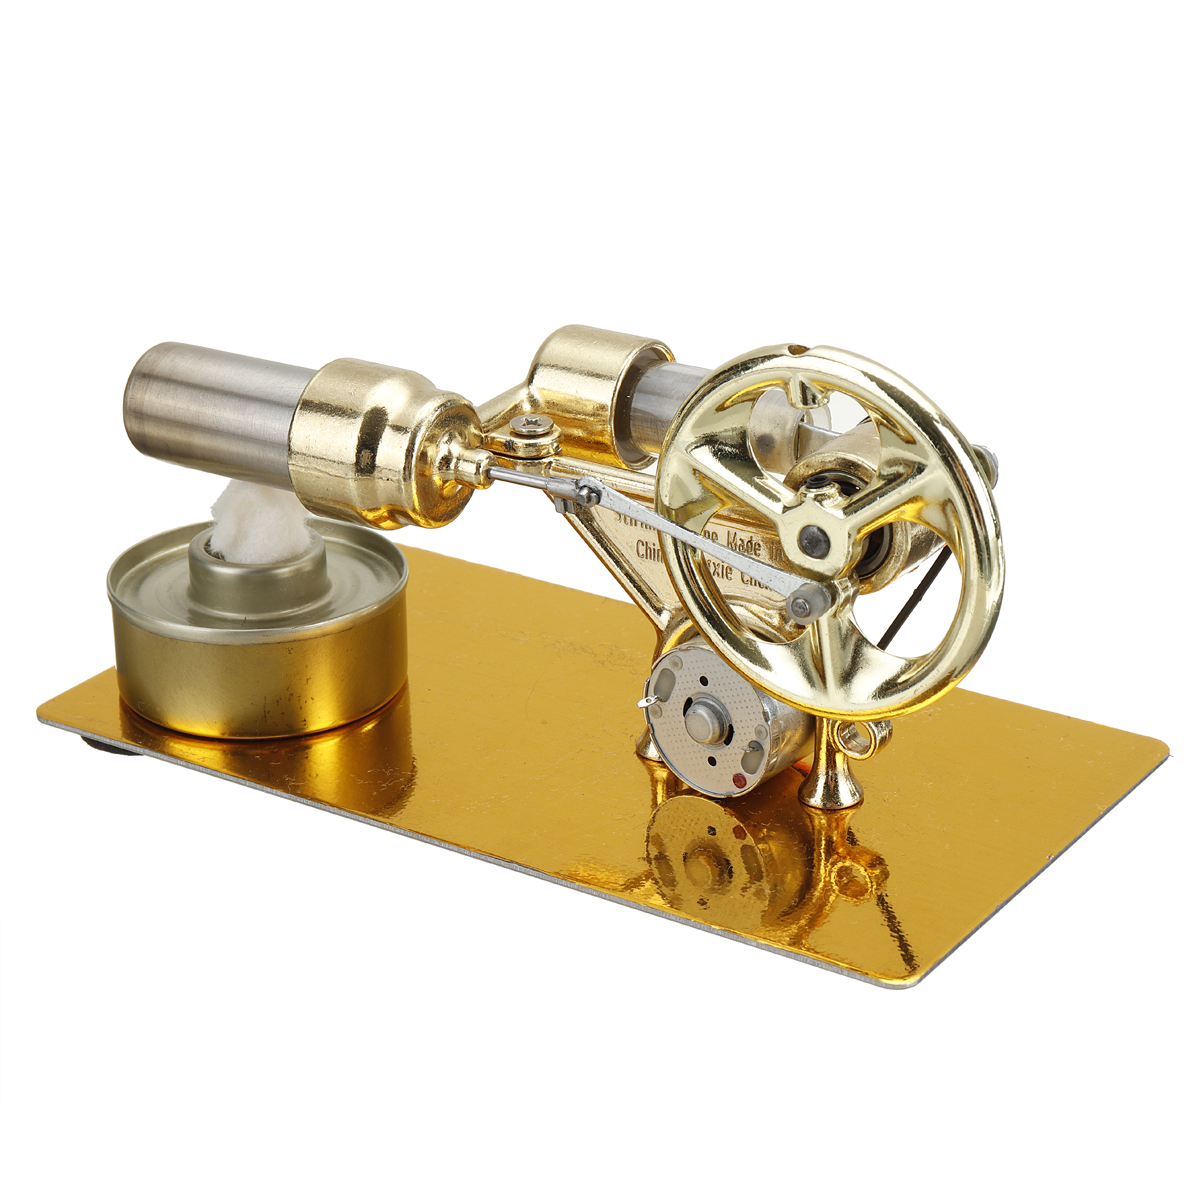 1PC-16-x-85-x-11-cm--Physical-Science-DIY-Kits-Stirling-Engine-Model-with-Parts-1939762-8